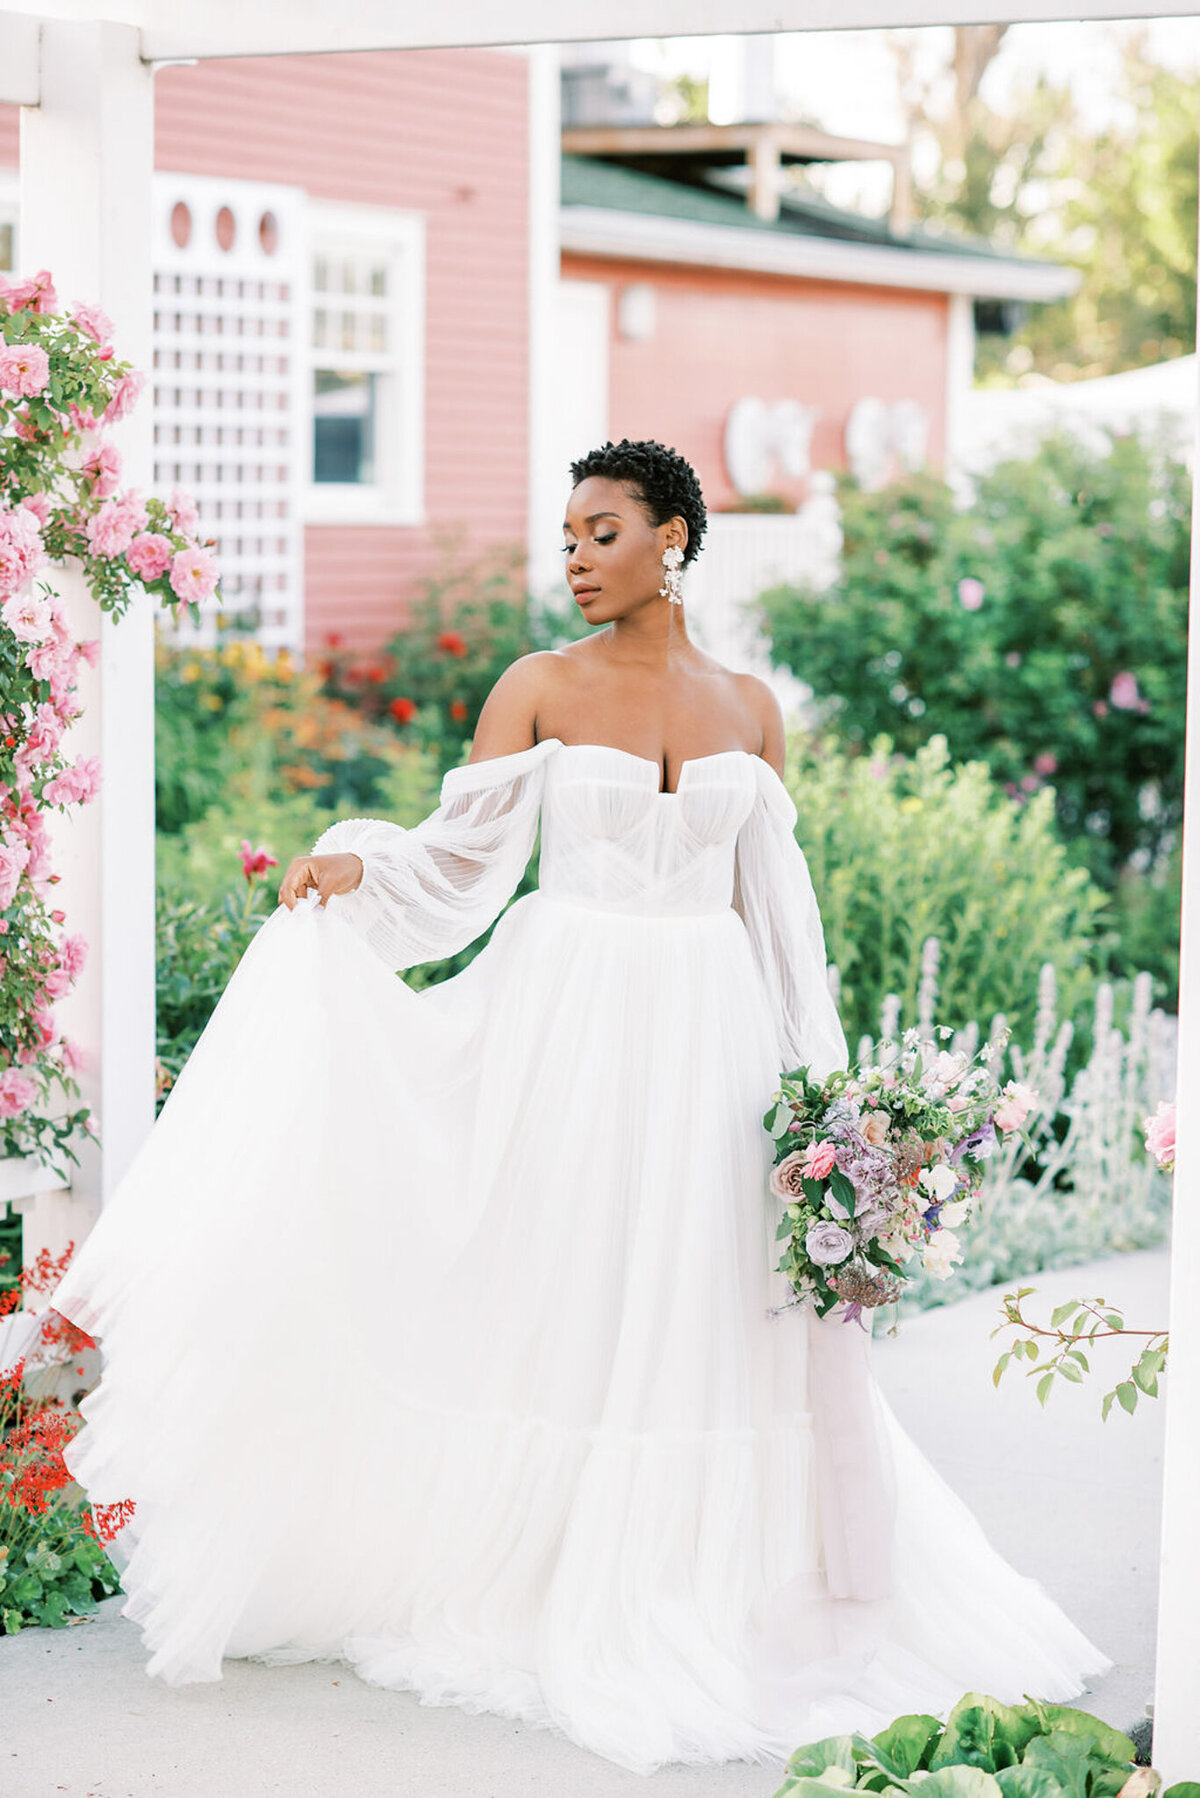 Stunning and whimsical bride wearing gown from Blush & Raven, a couture wedding bridal boutique based in Calgary, Alberta. Featured on the Brontë Bride Vendor Guide.